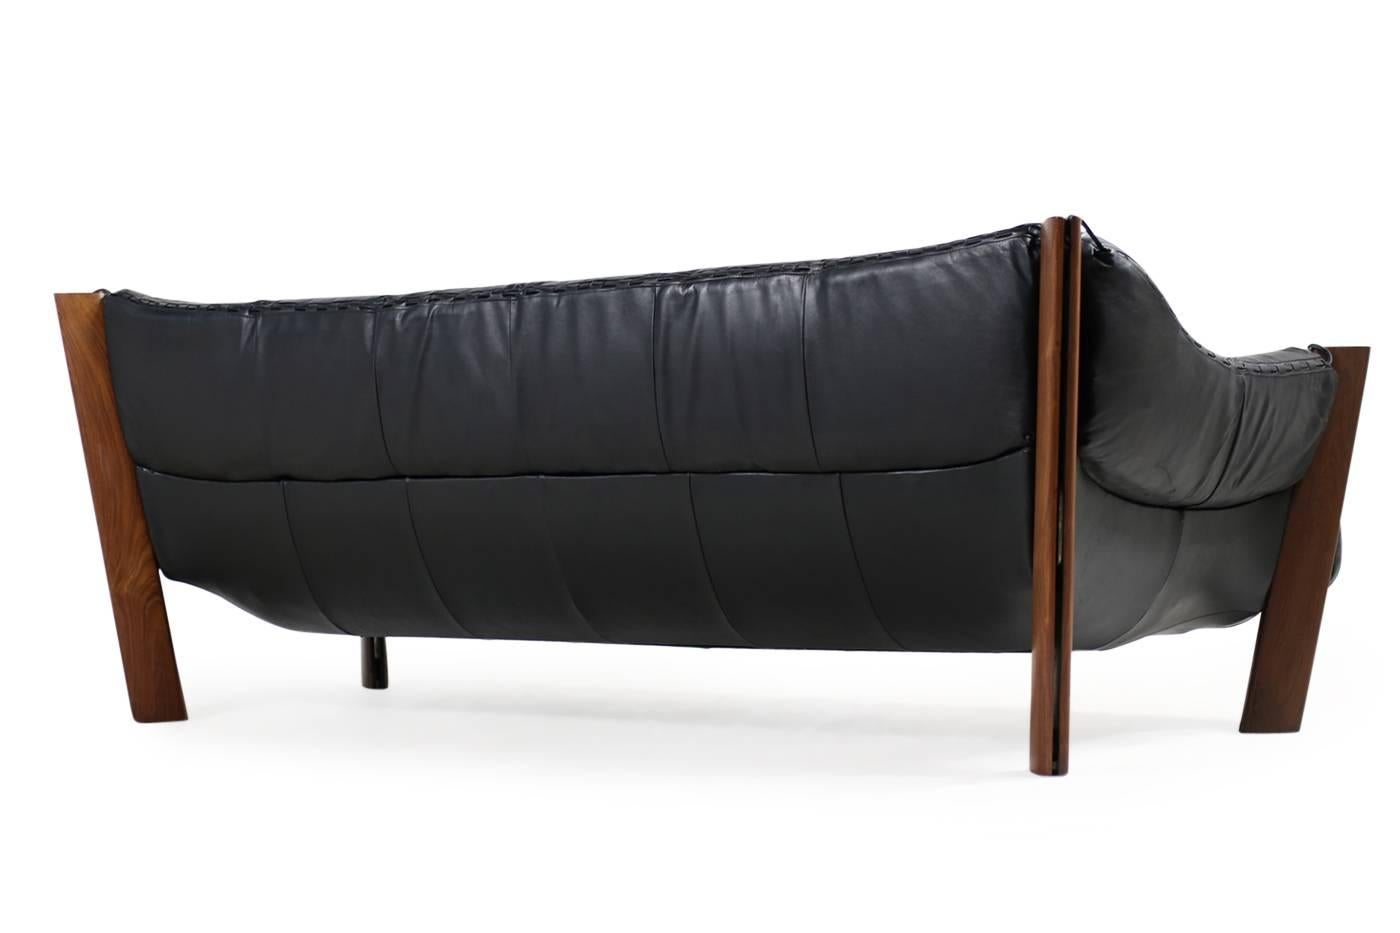 Beautiful vintage sofa by Percival Lafer, designed in 1974 in Brazil, solid wooden jacaranda base and leather. 

Measures: sofa 220 x 93 x 74cm SH 38cm
Chairs 95 x 93 x 74cm SH 38cm
Ottoman 80 x 60 x 38cm.
 